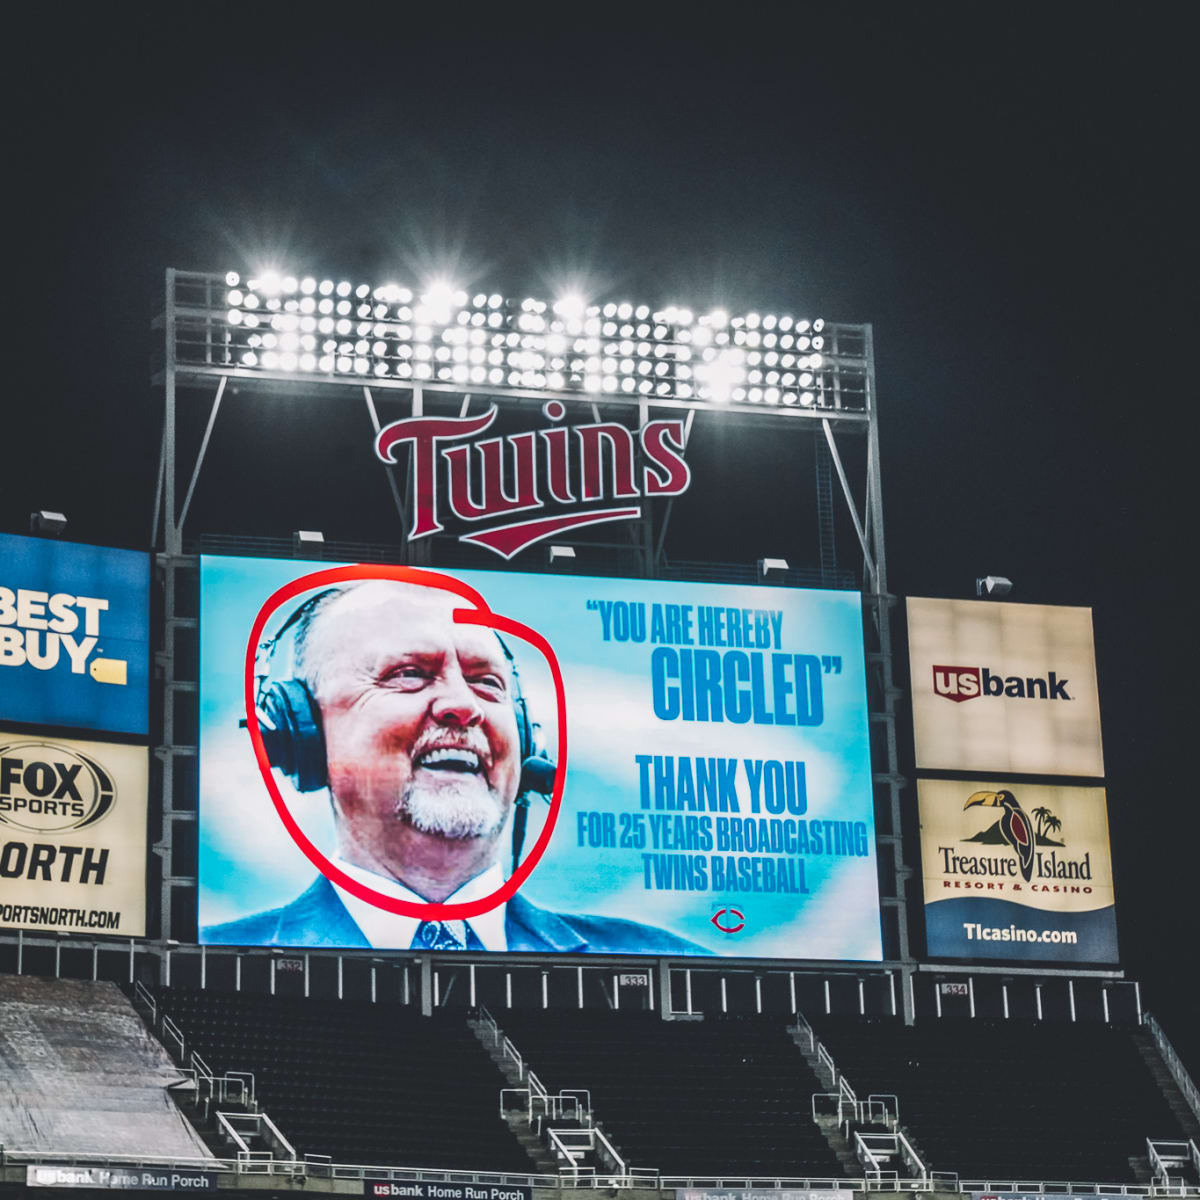 A tribute to Bert Blyleven, Part One: The Minnesota Twins Player